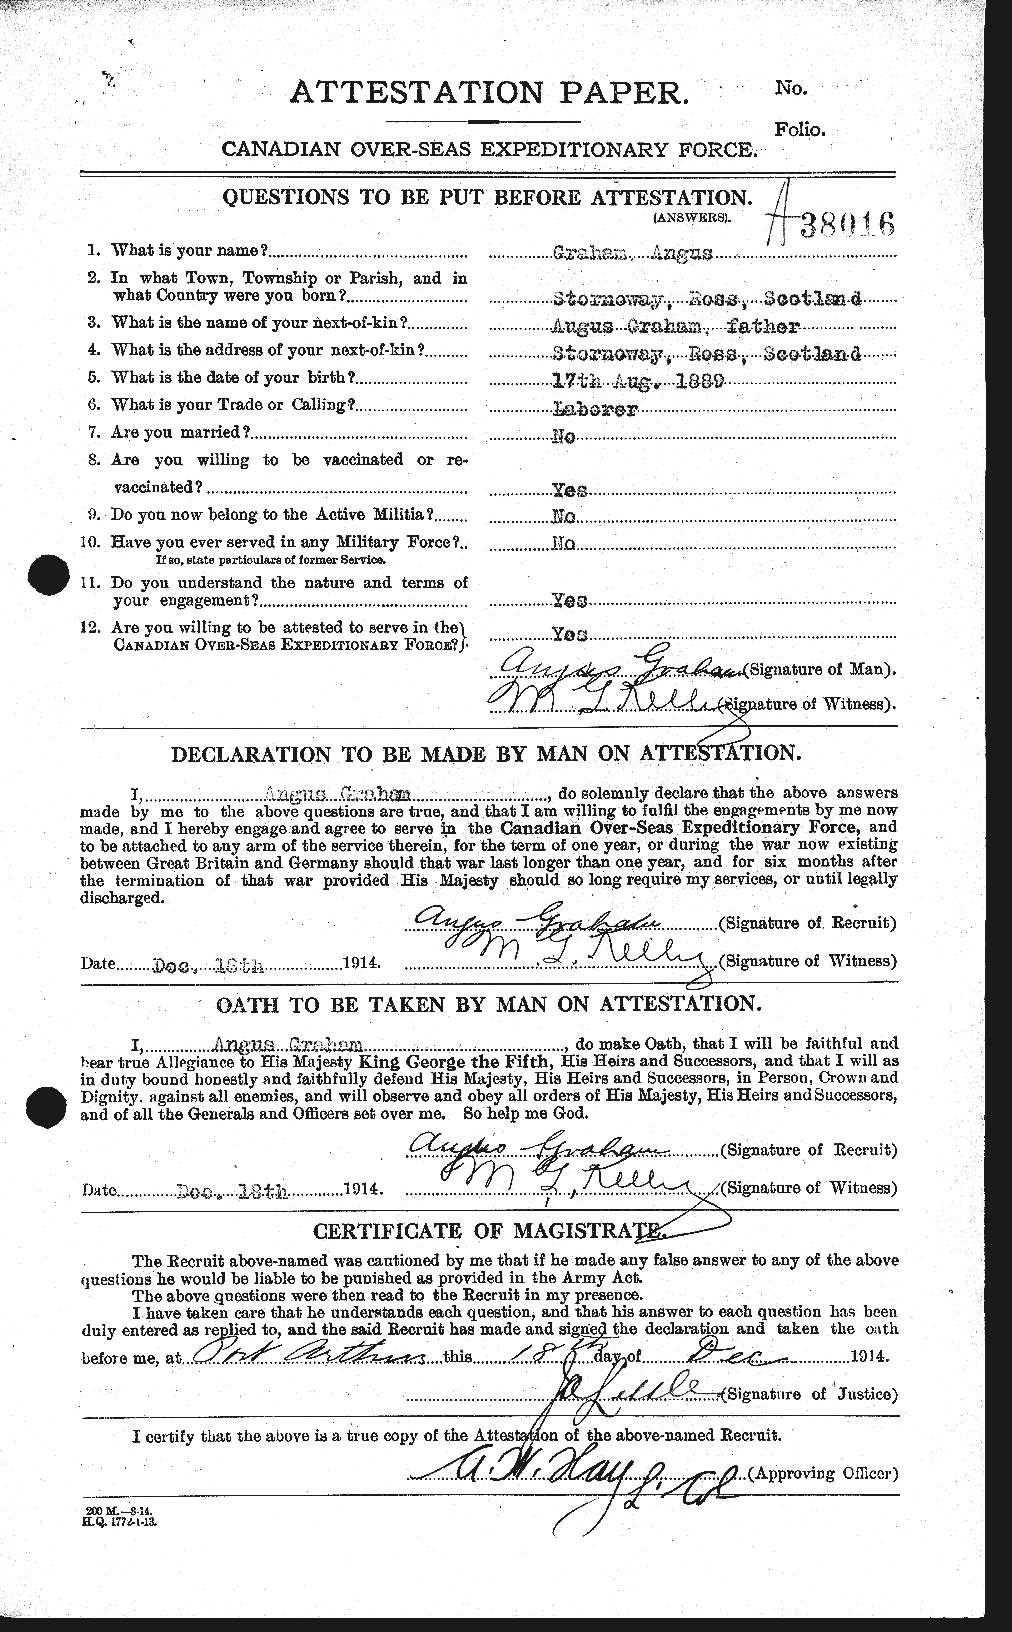 Personnel Records of the First World War - CEF 359620a